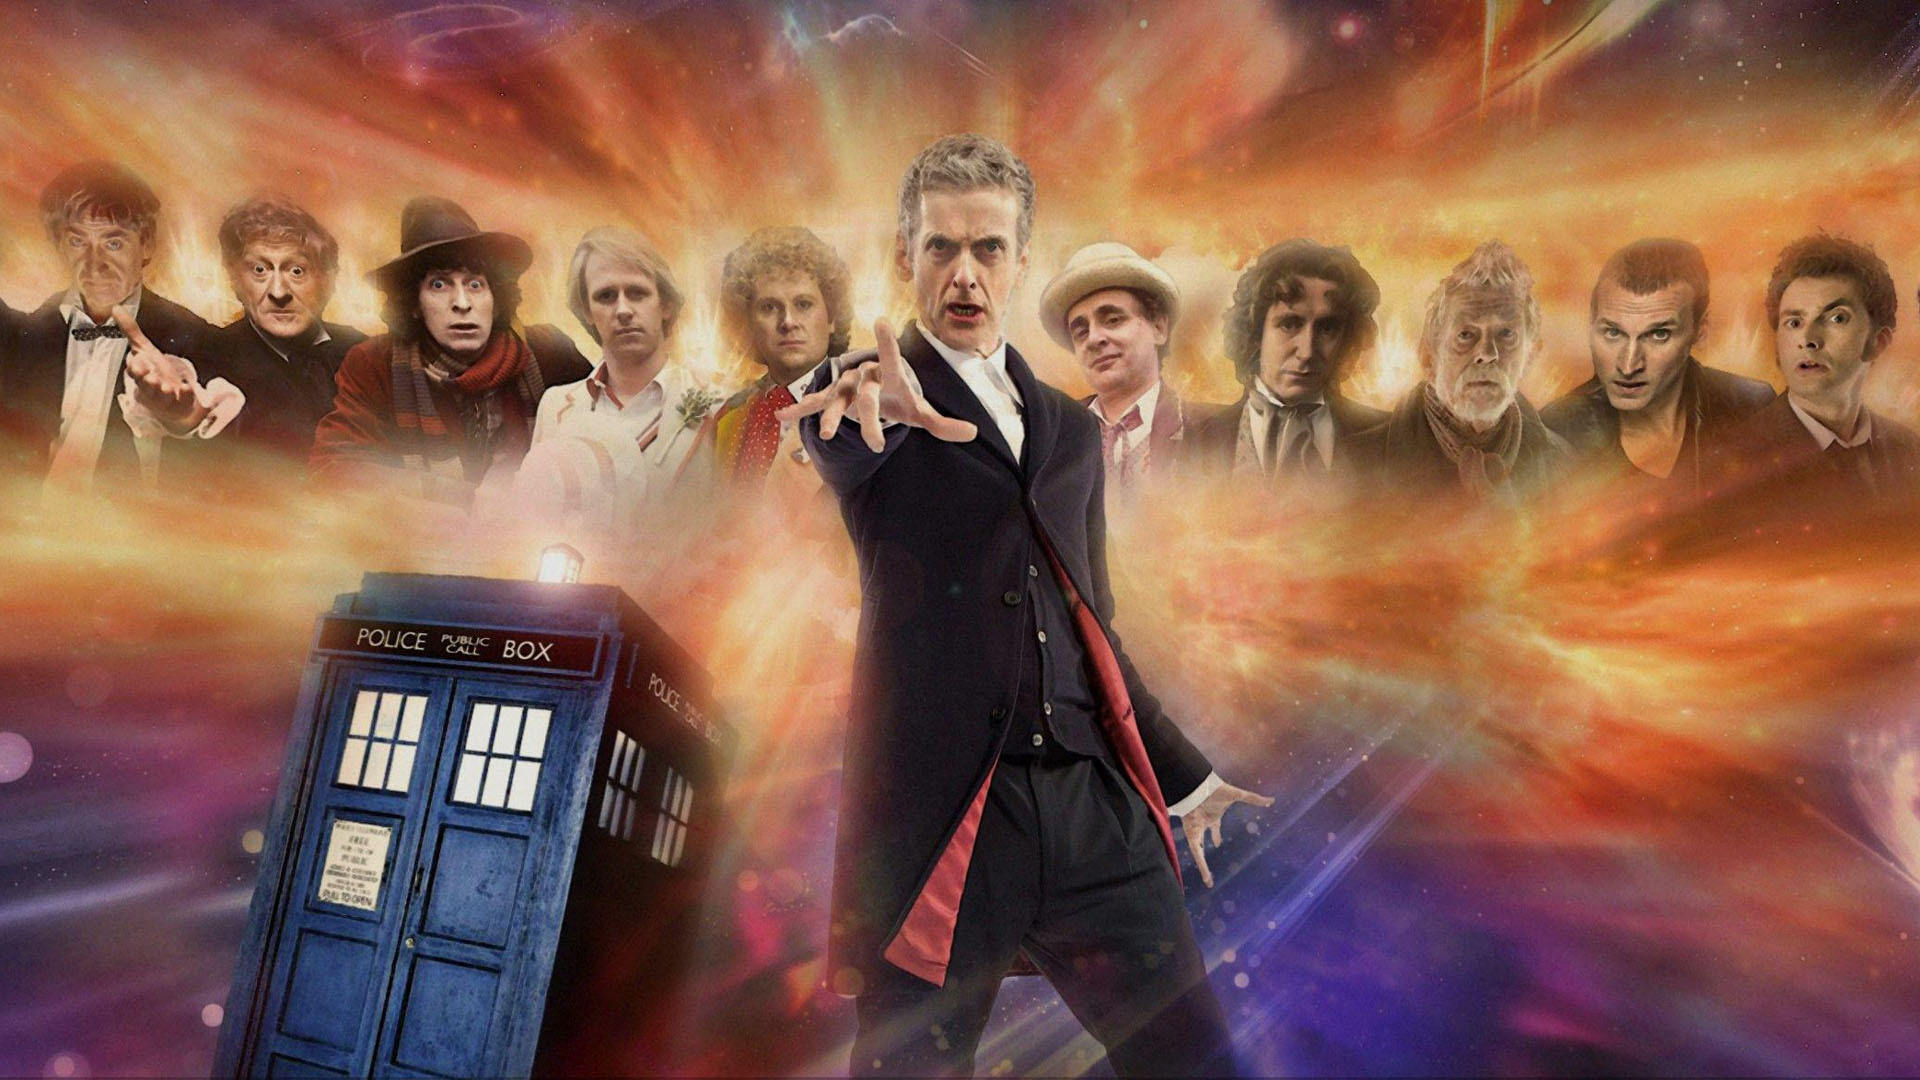 Doctor Who Wallpaper Image Photos Pictures Background